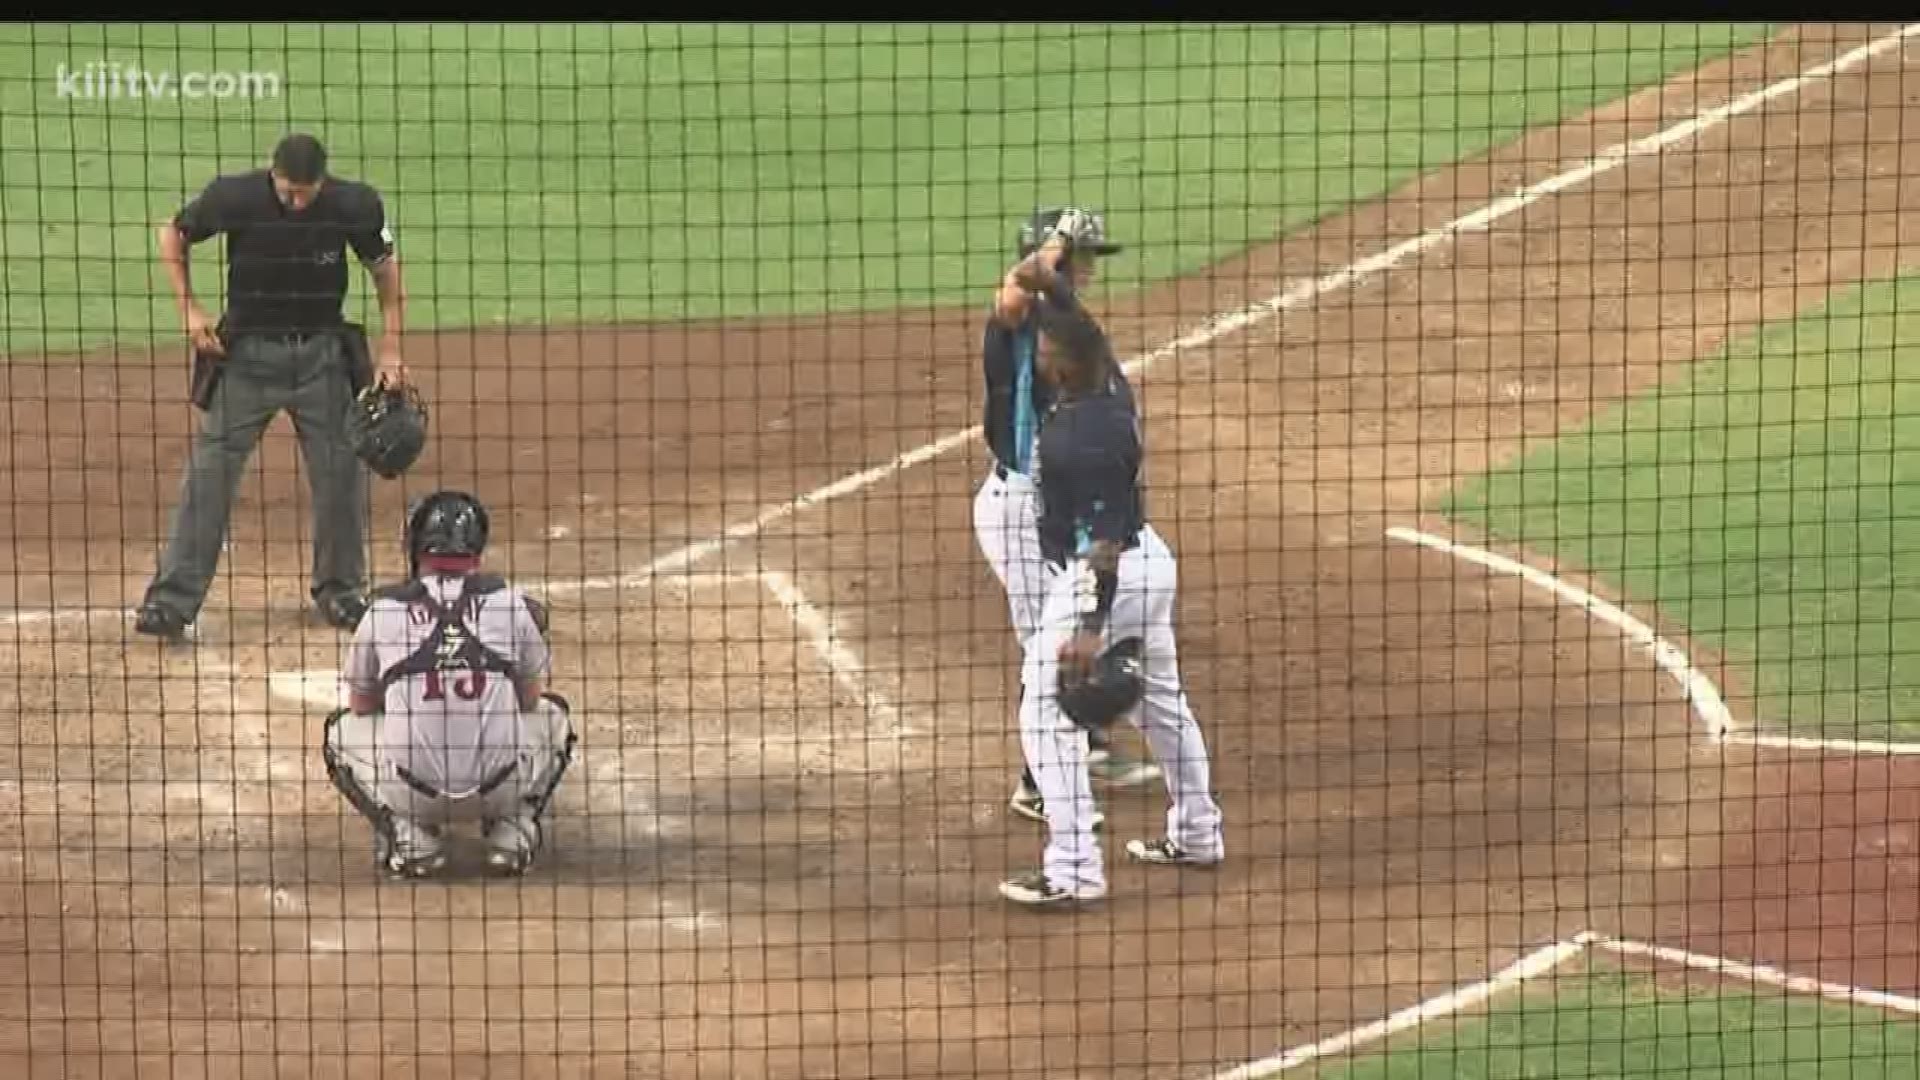 The Corpus Christi Hooks topped the Frisco RoughRiders 4-3 with two runs in the 9th. 